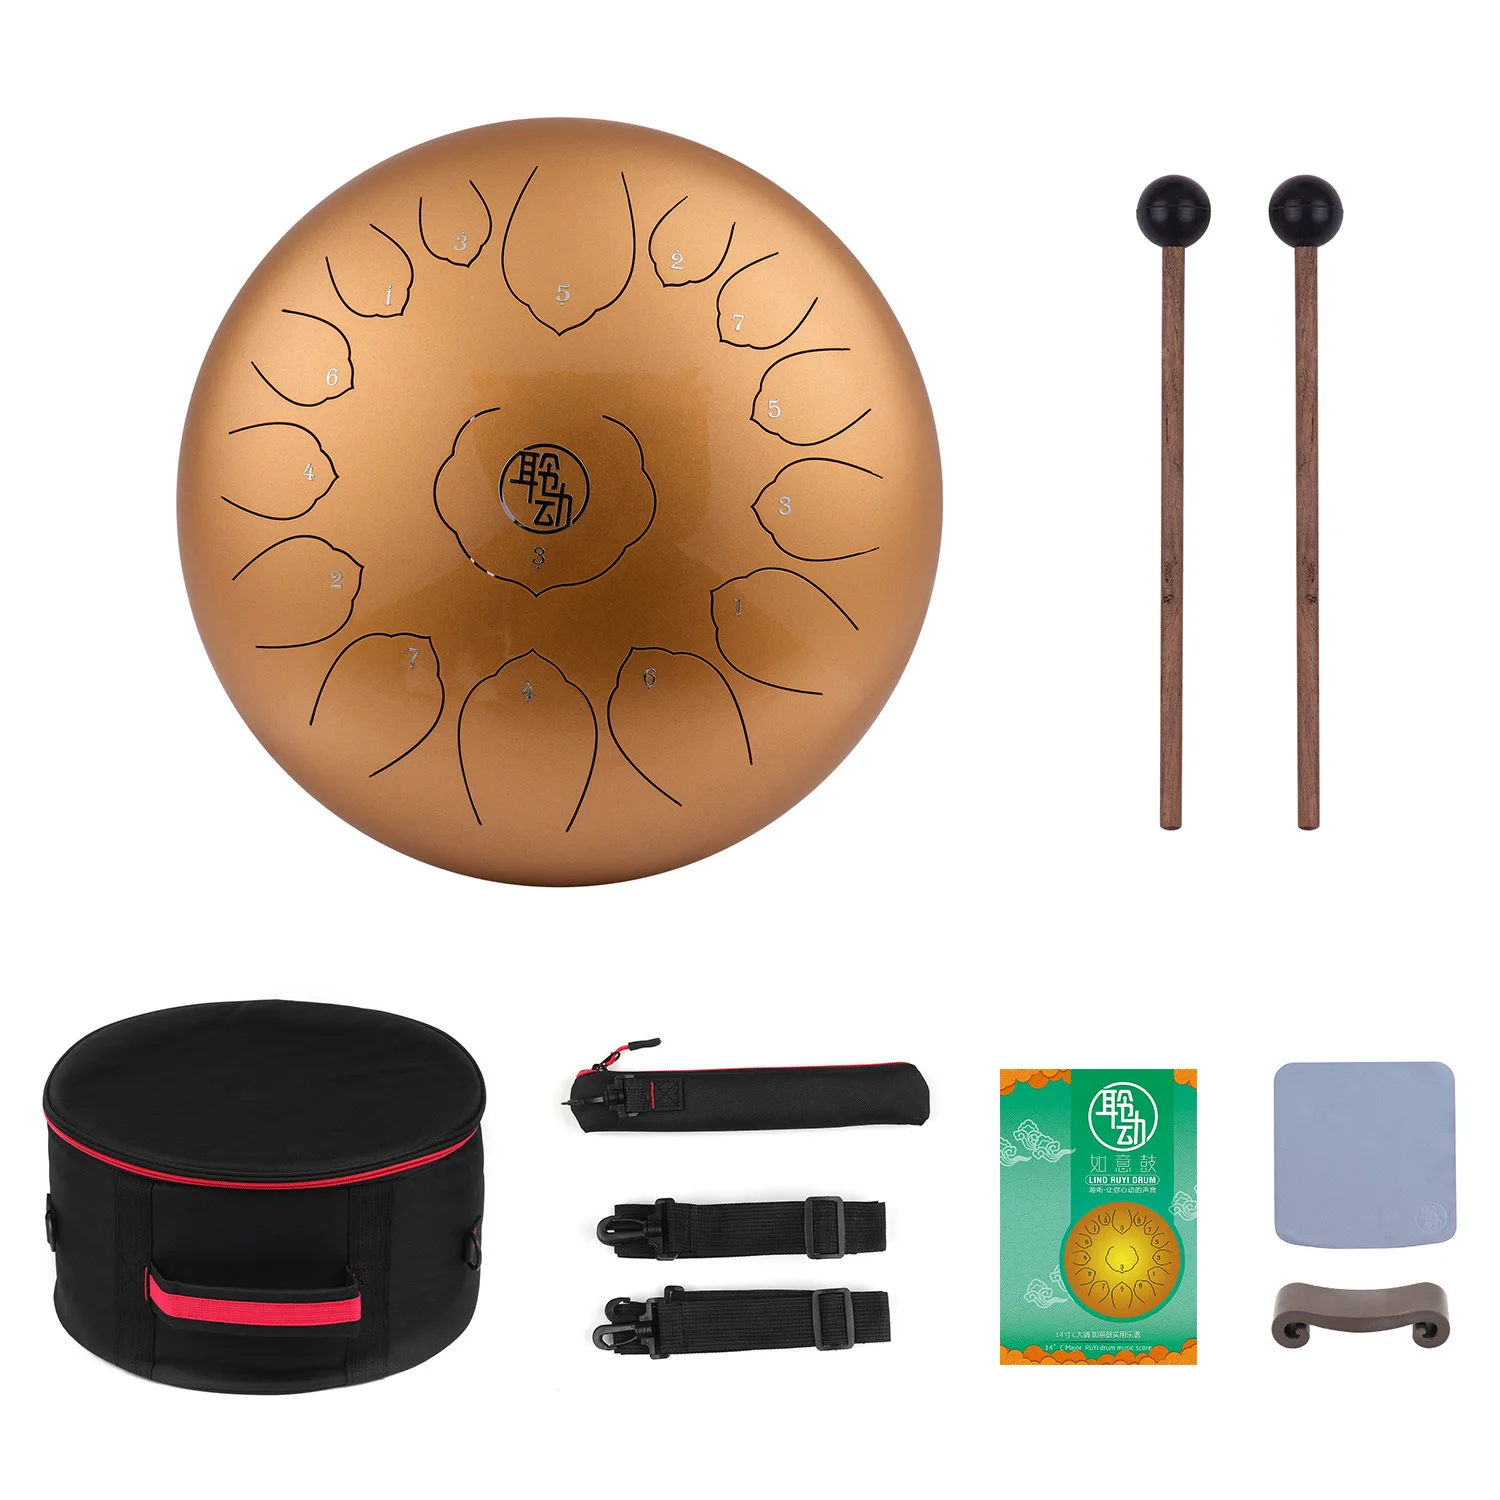 

14 Inch Tongue Drum Mini 15-Tone Steel Drum Tongue D Key Hand Pan Drum with Drum Mallets Carry Bag Percussion Instrument